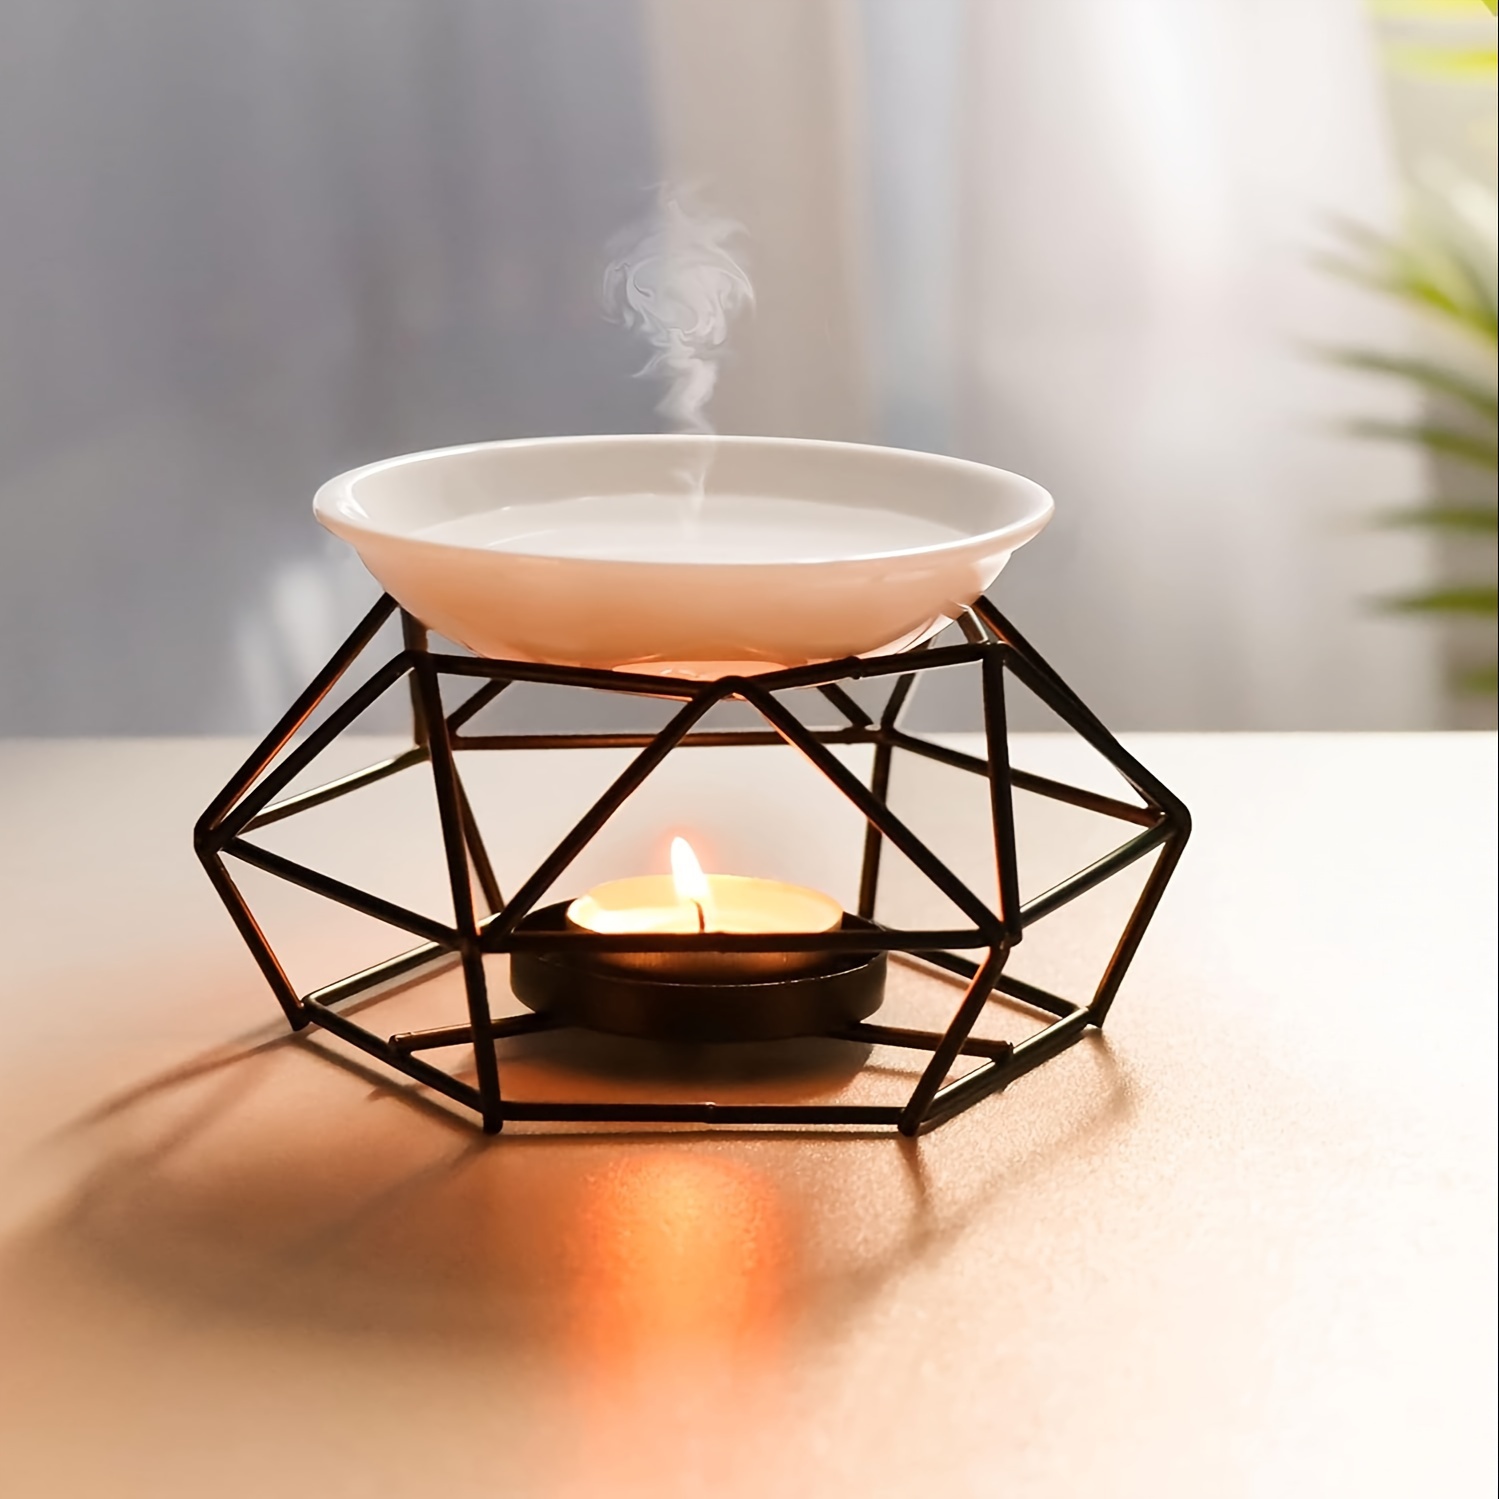 3-in-1 Ceramic Wax Warmer, Wax Melt Warmer, Wax Melter for Scented Wax, Jar  Candles or Essential Oil, Candle Wax Melt Warmer Gifts for SPA Home Office  - China 3-in-1 Ceramic Wax Warmer